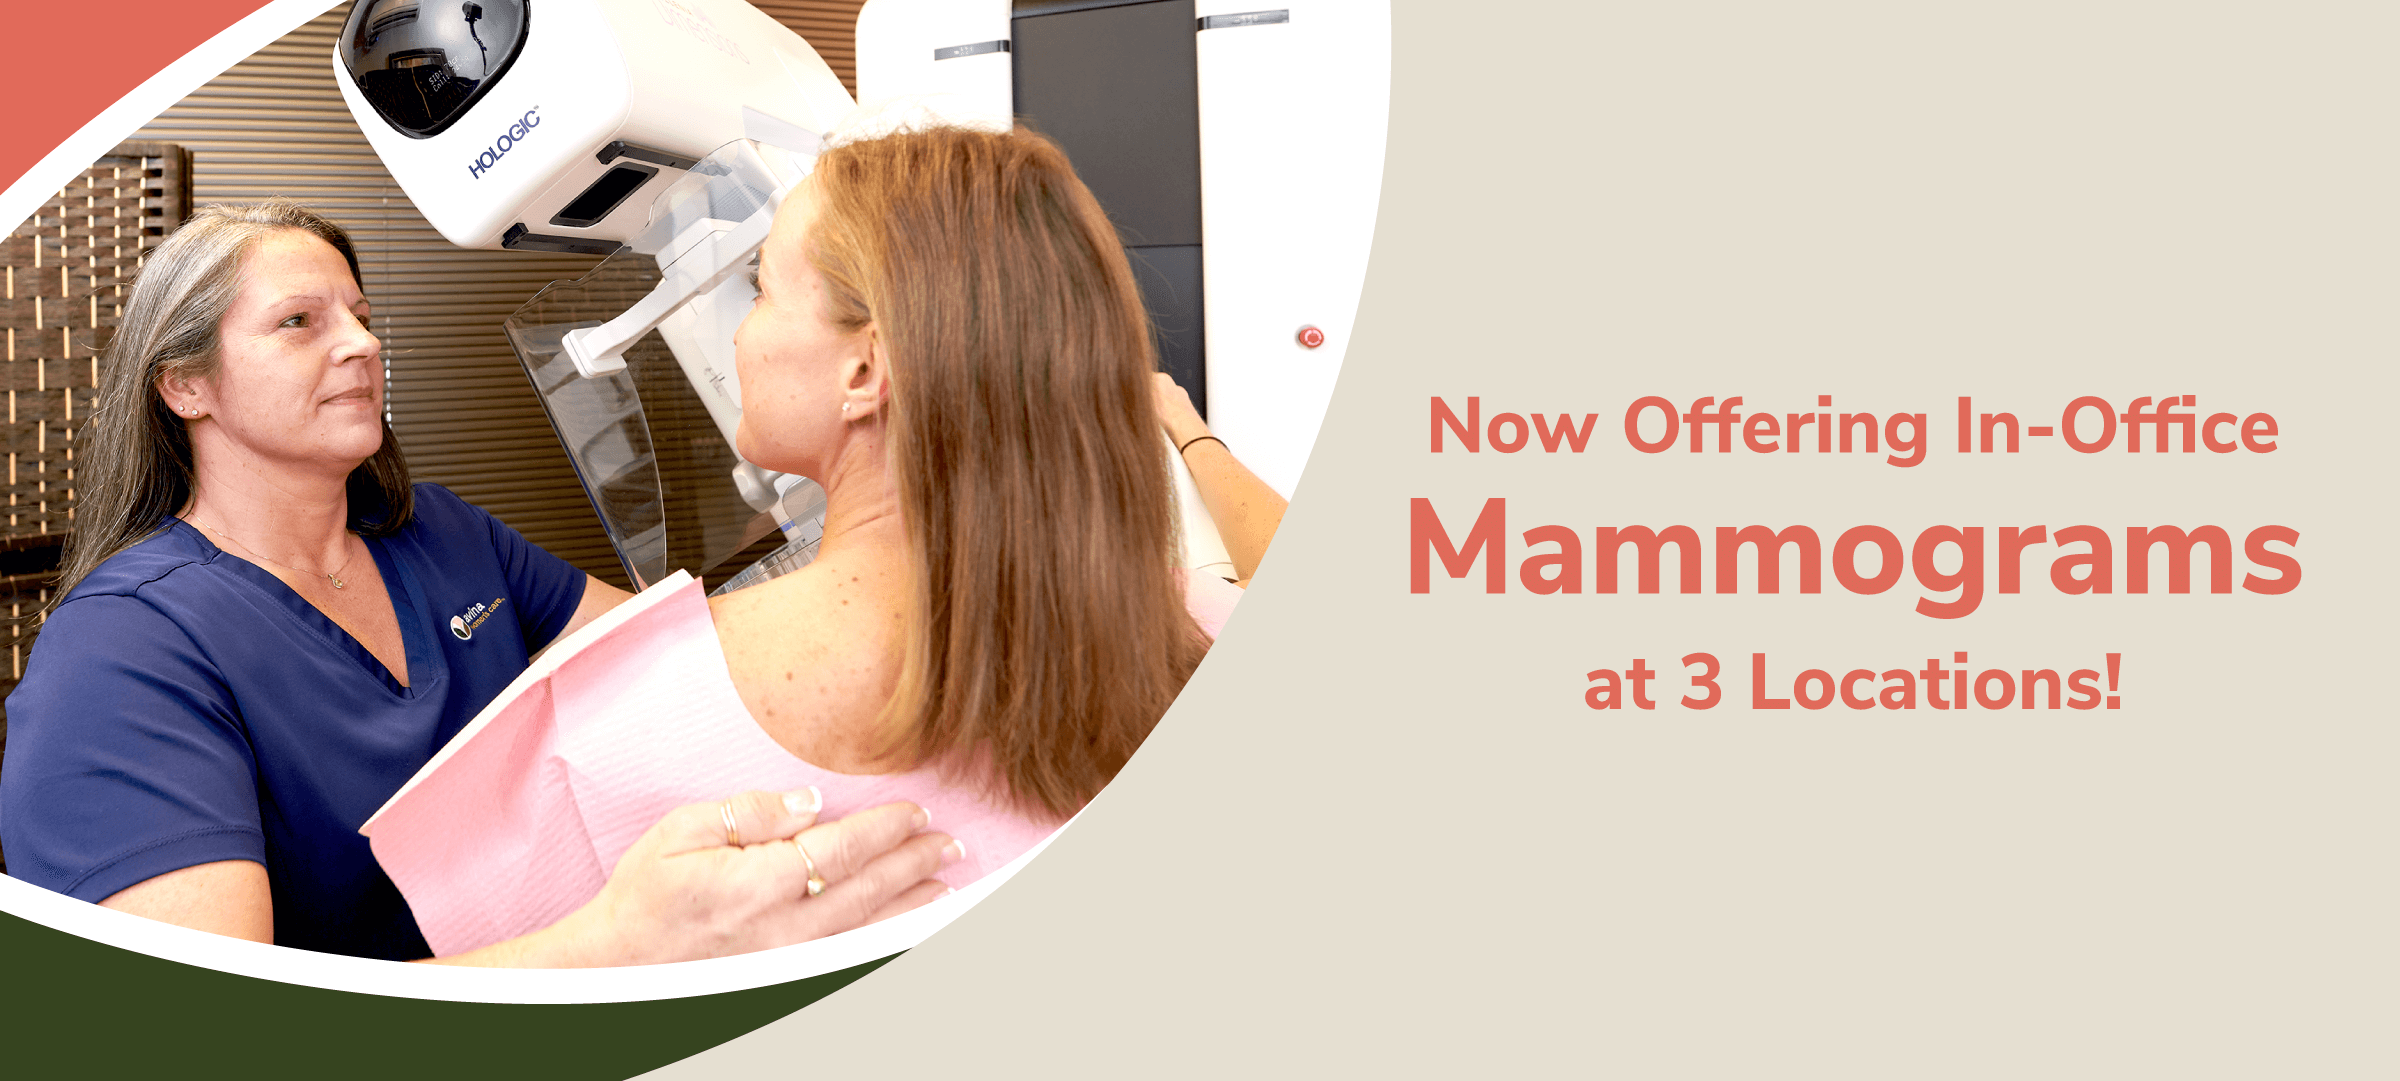 Now Offering In-Office Mammograms at 3 locations! Image of doctor performing mammogram.